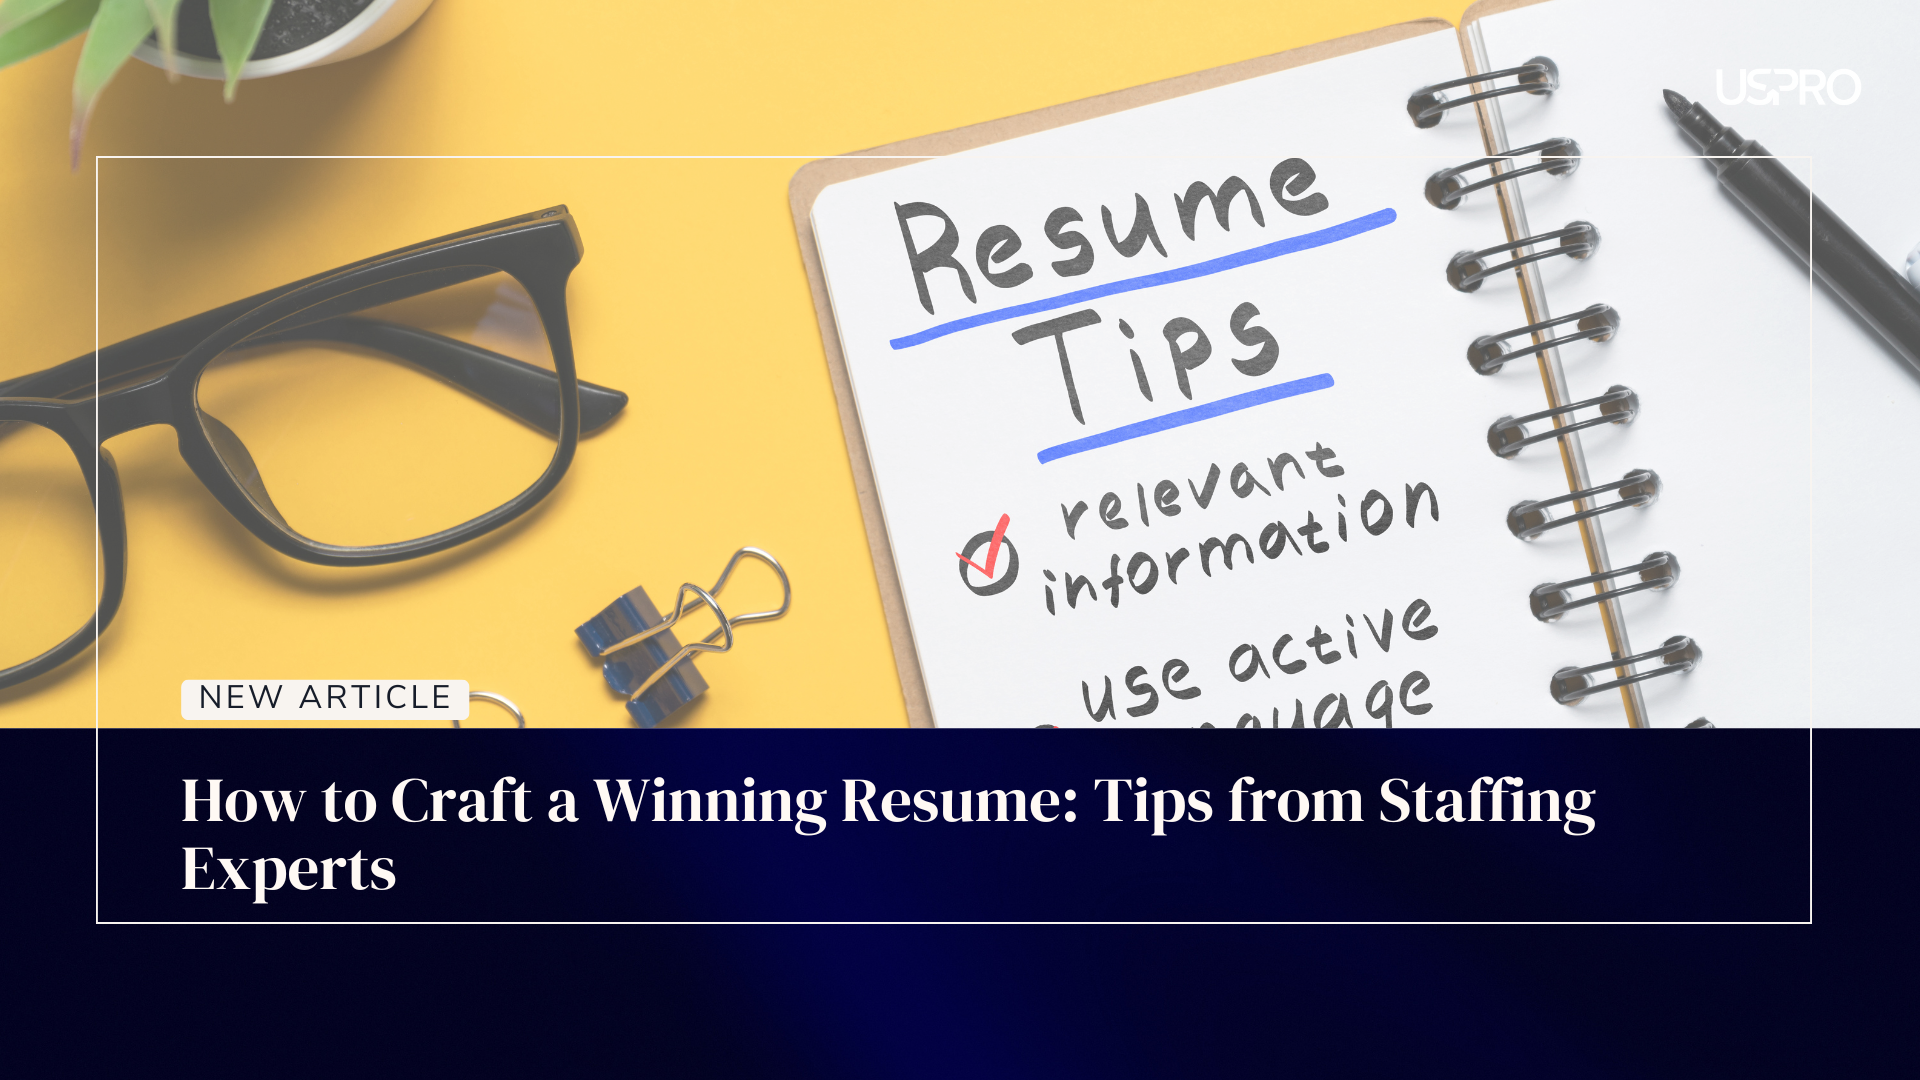 How to Craft a Winning Resume: Tips from Staffing Experts, Resume Revamping relevant information from USPRO